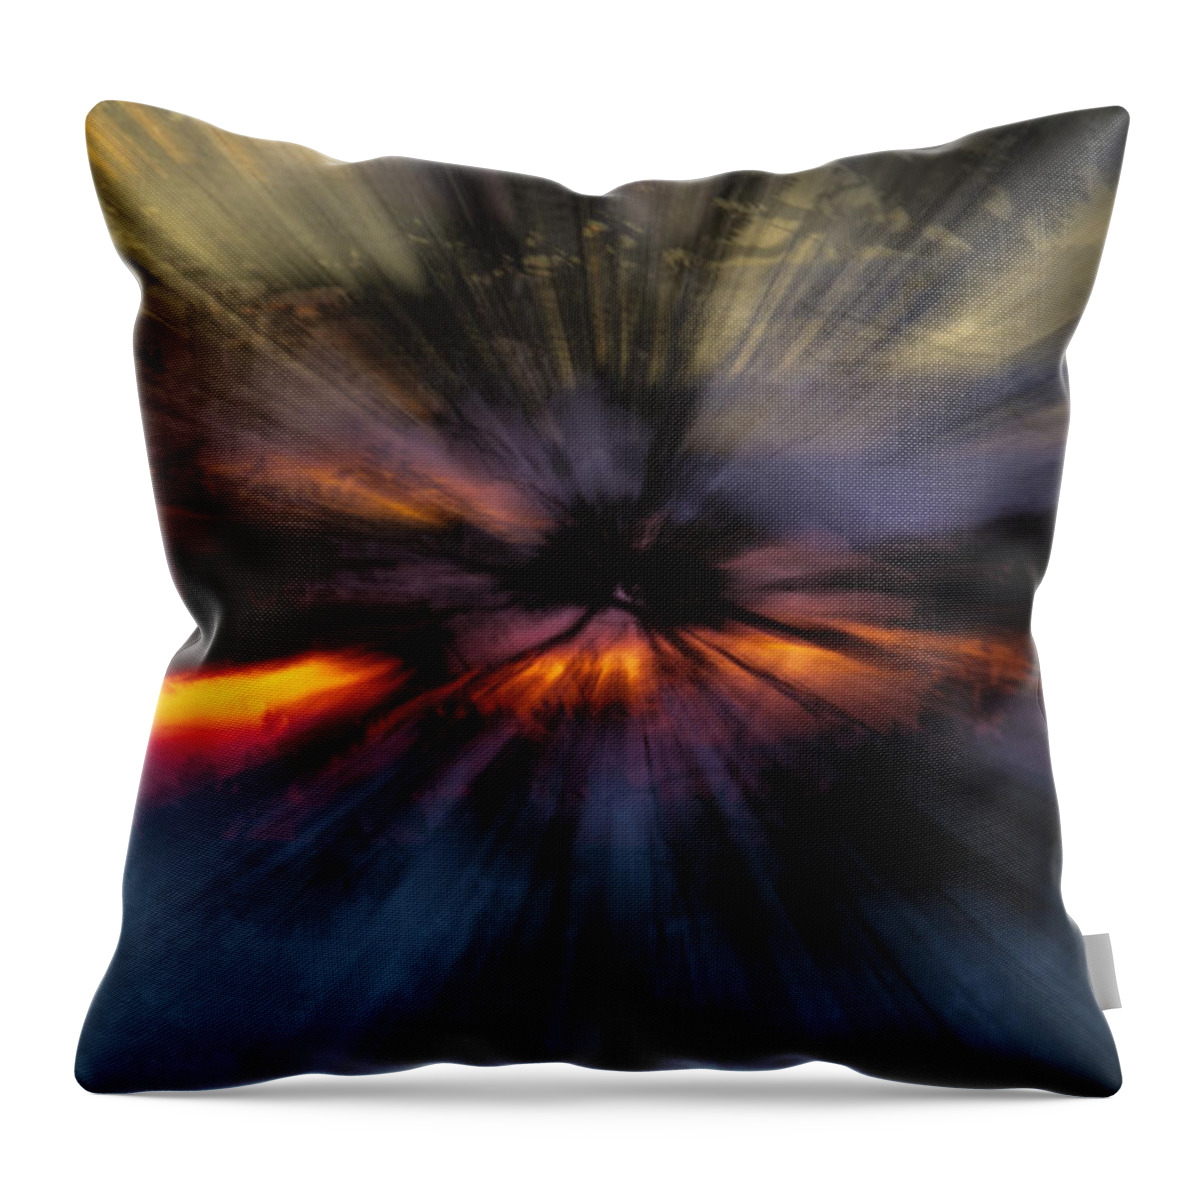 Photography Throw Pillow featuring the photograph Suset Hallucination by Frederic A Reinecke